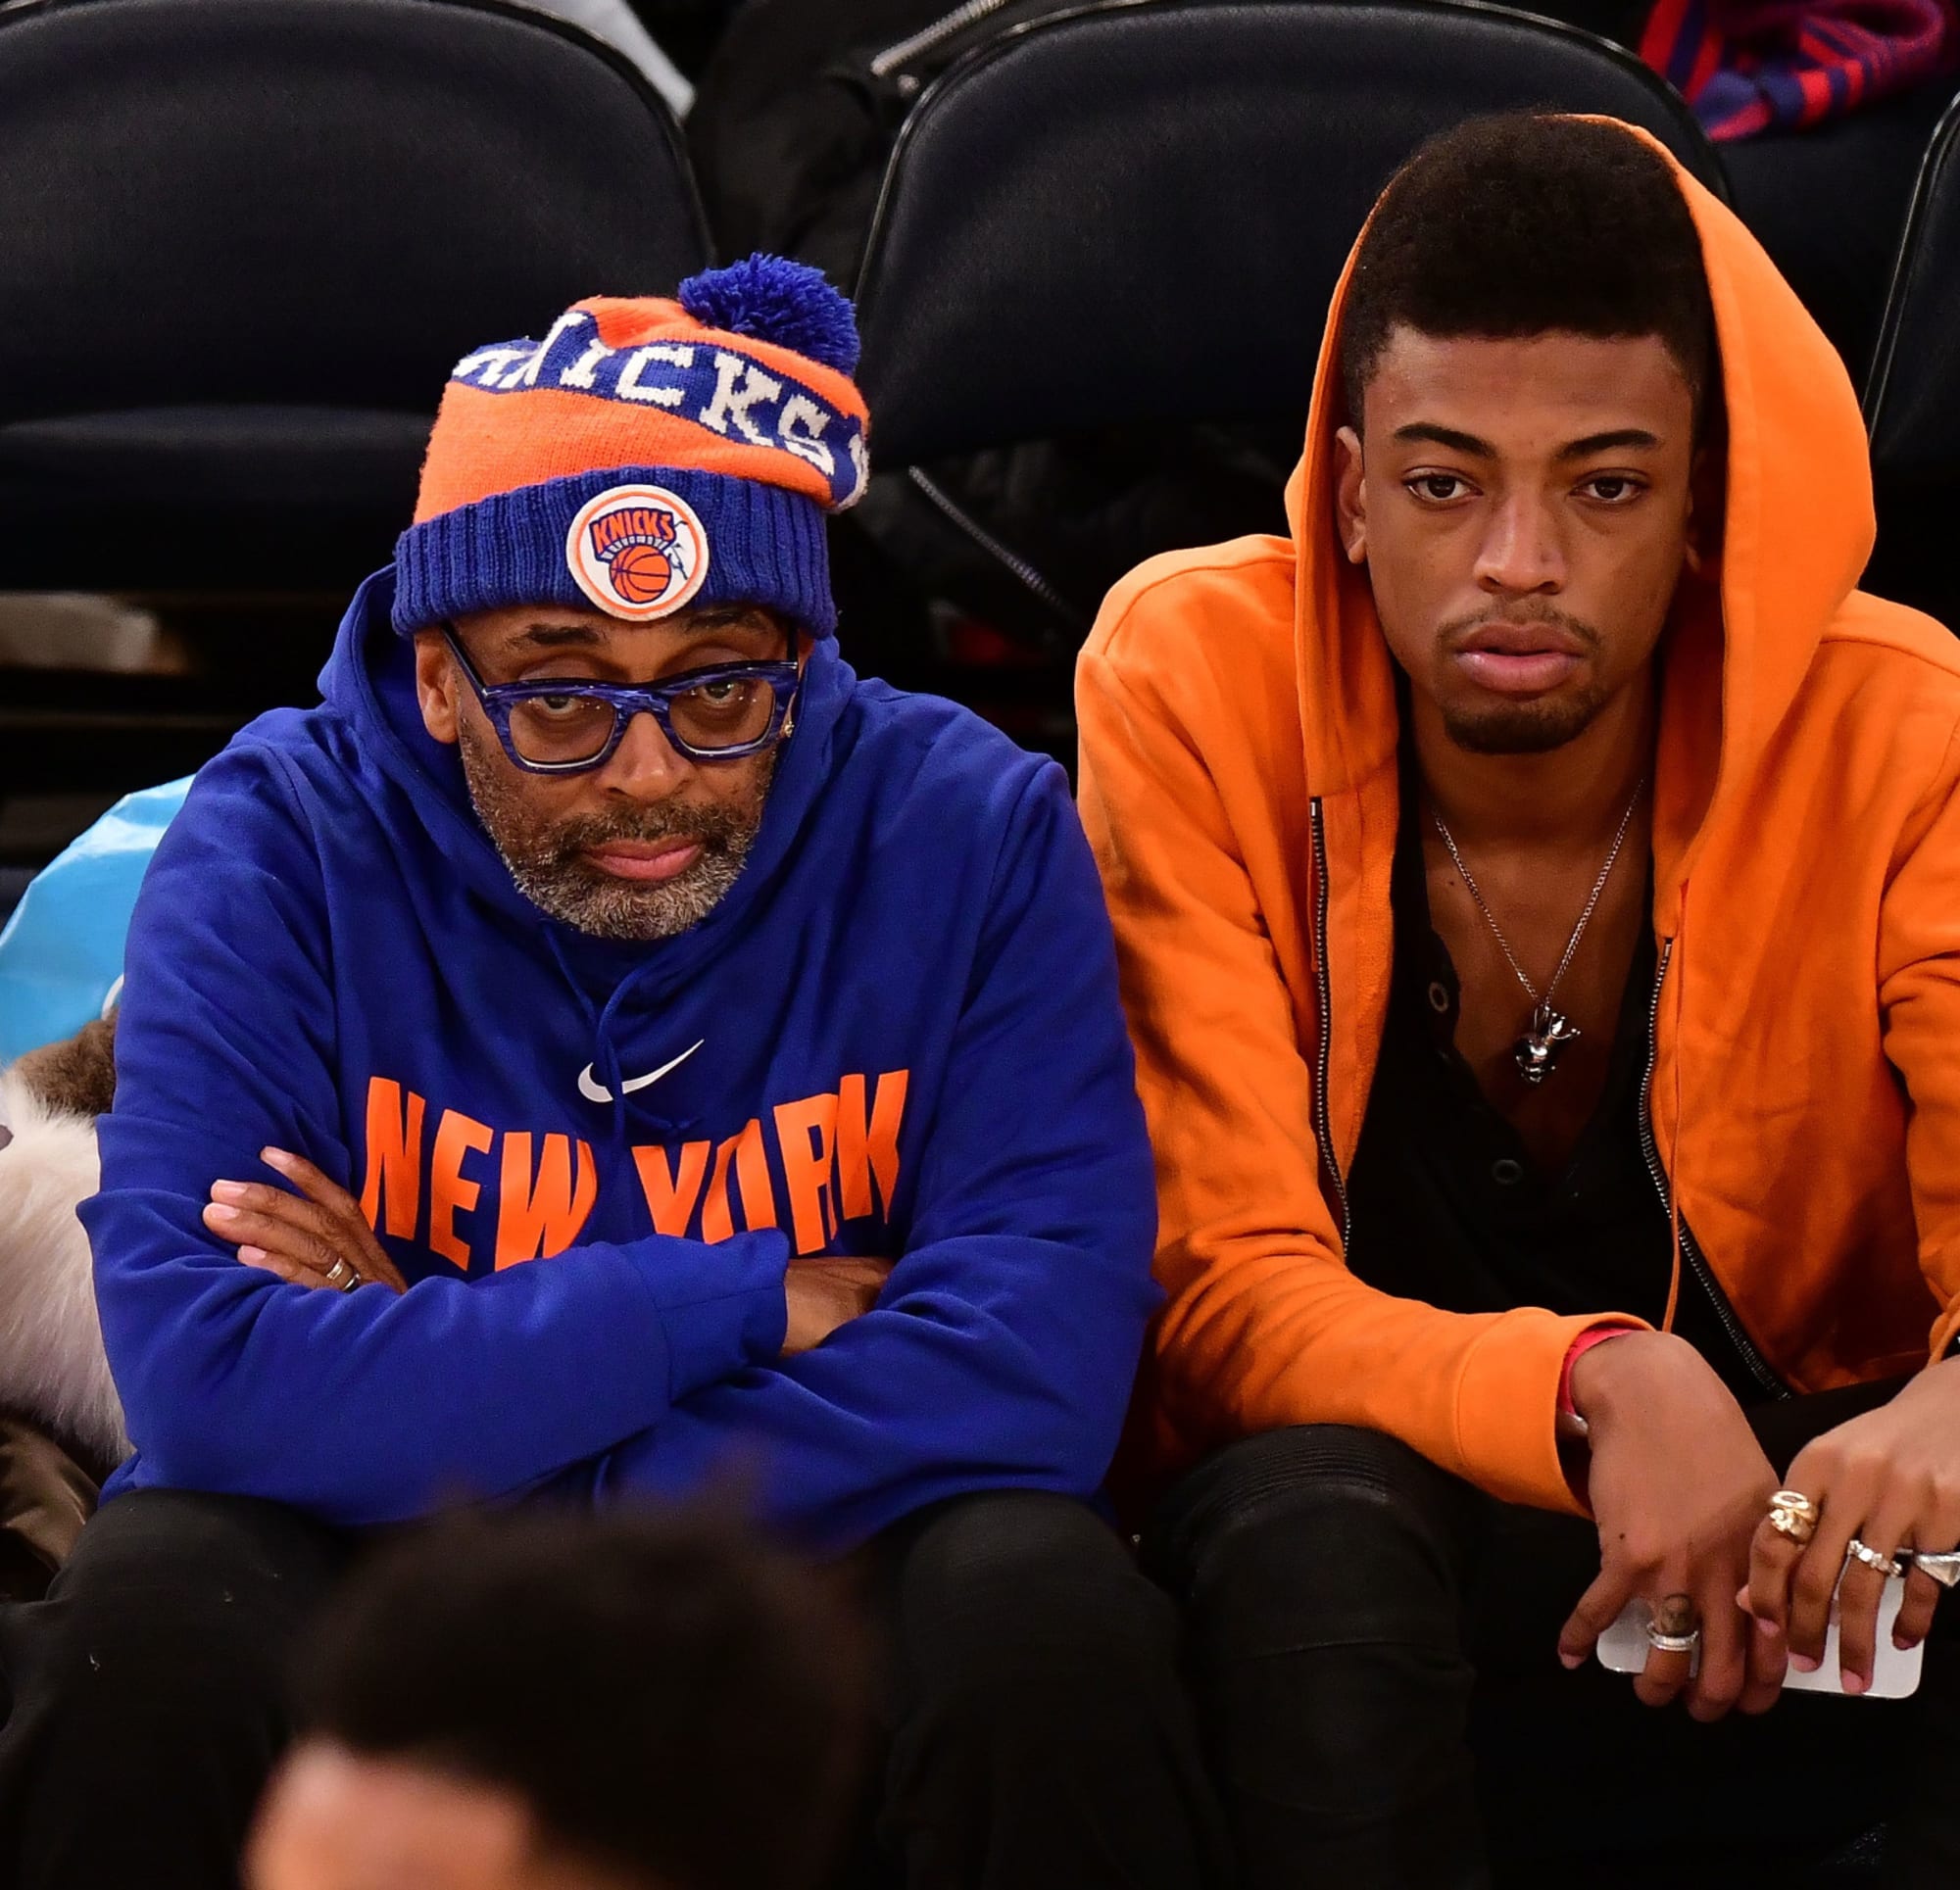 The Knicks are feuding with Spike Lee, burning their very last bridge